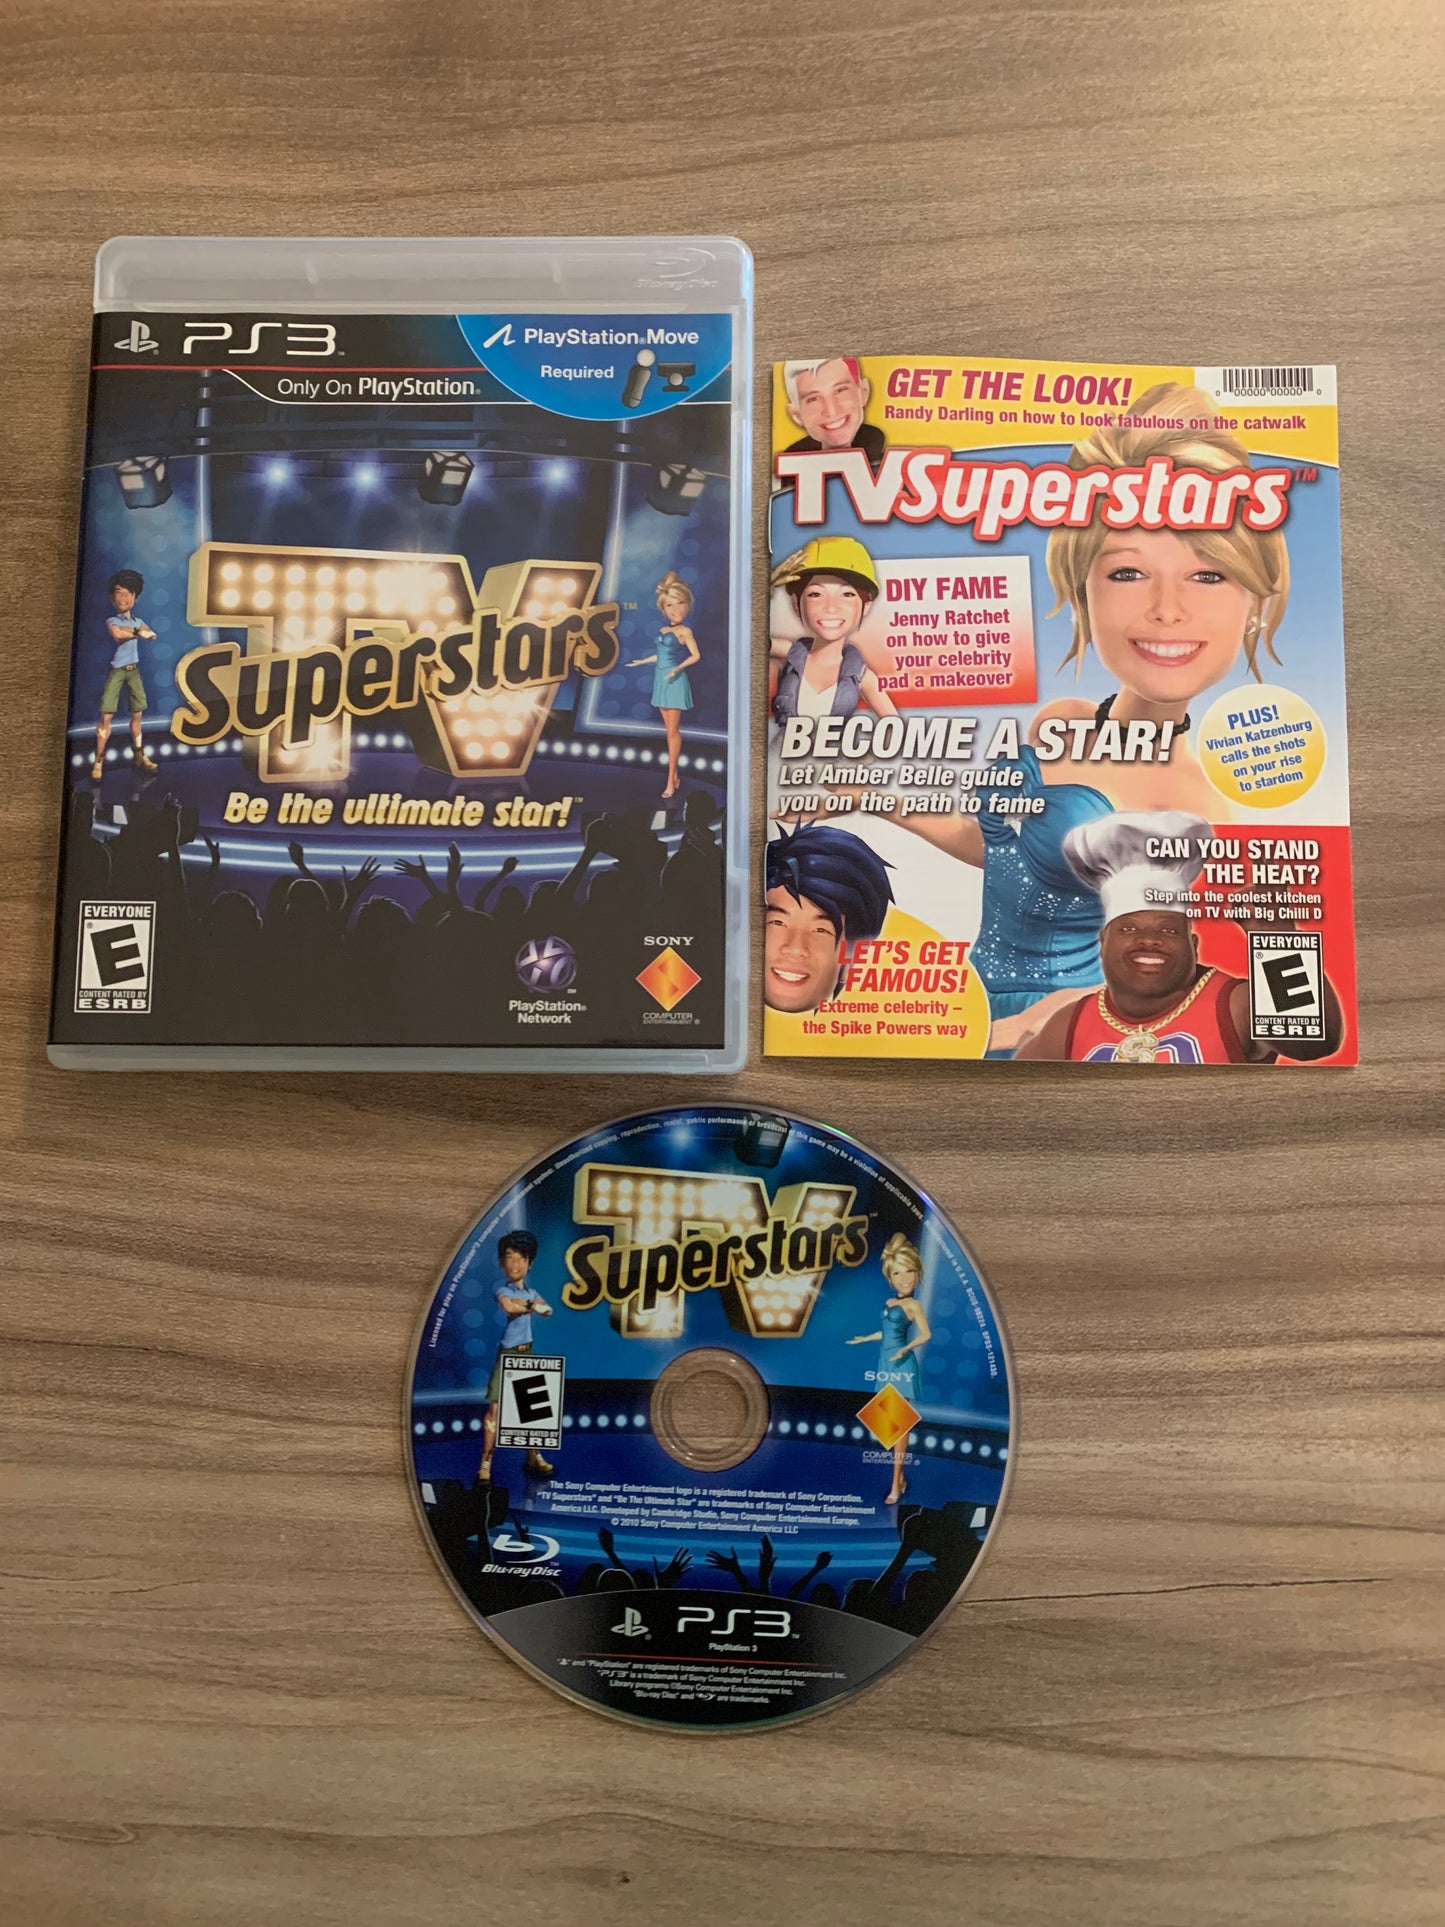 PiXEL-RETRO.COM : SONY PLAYSTATION 3 (PS3) COMPLET CIB BOX MANUAL GAME NTSC TV SUPERSTARS BE THE ULTIMATE STAR!